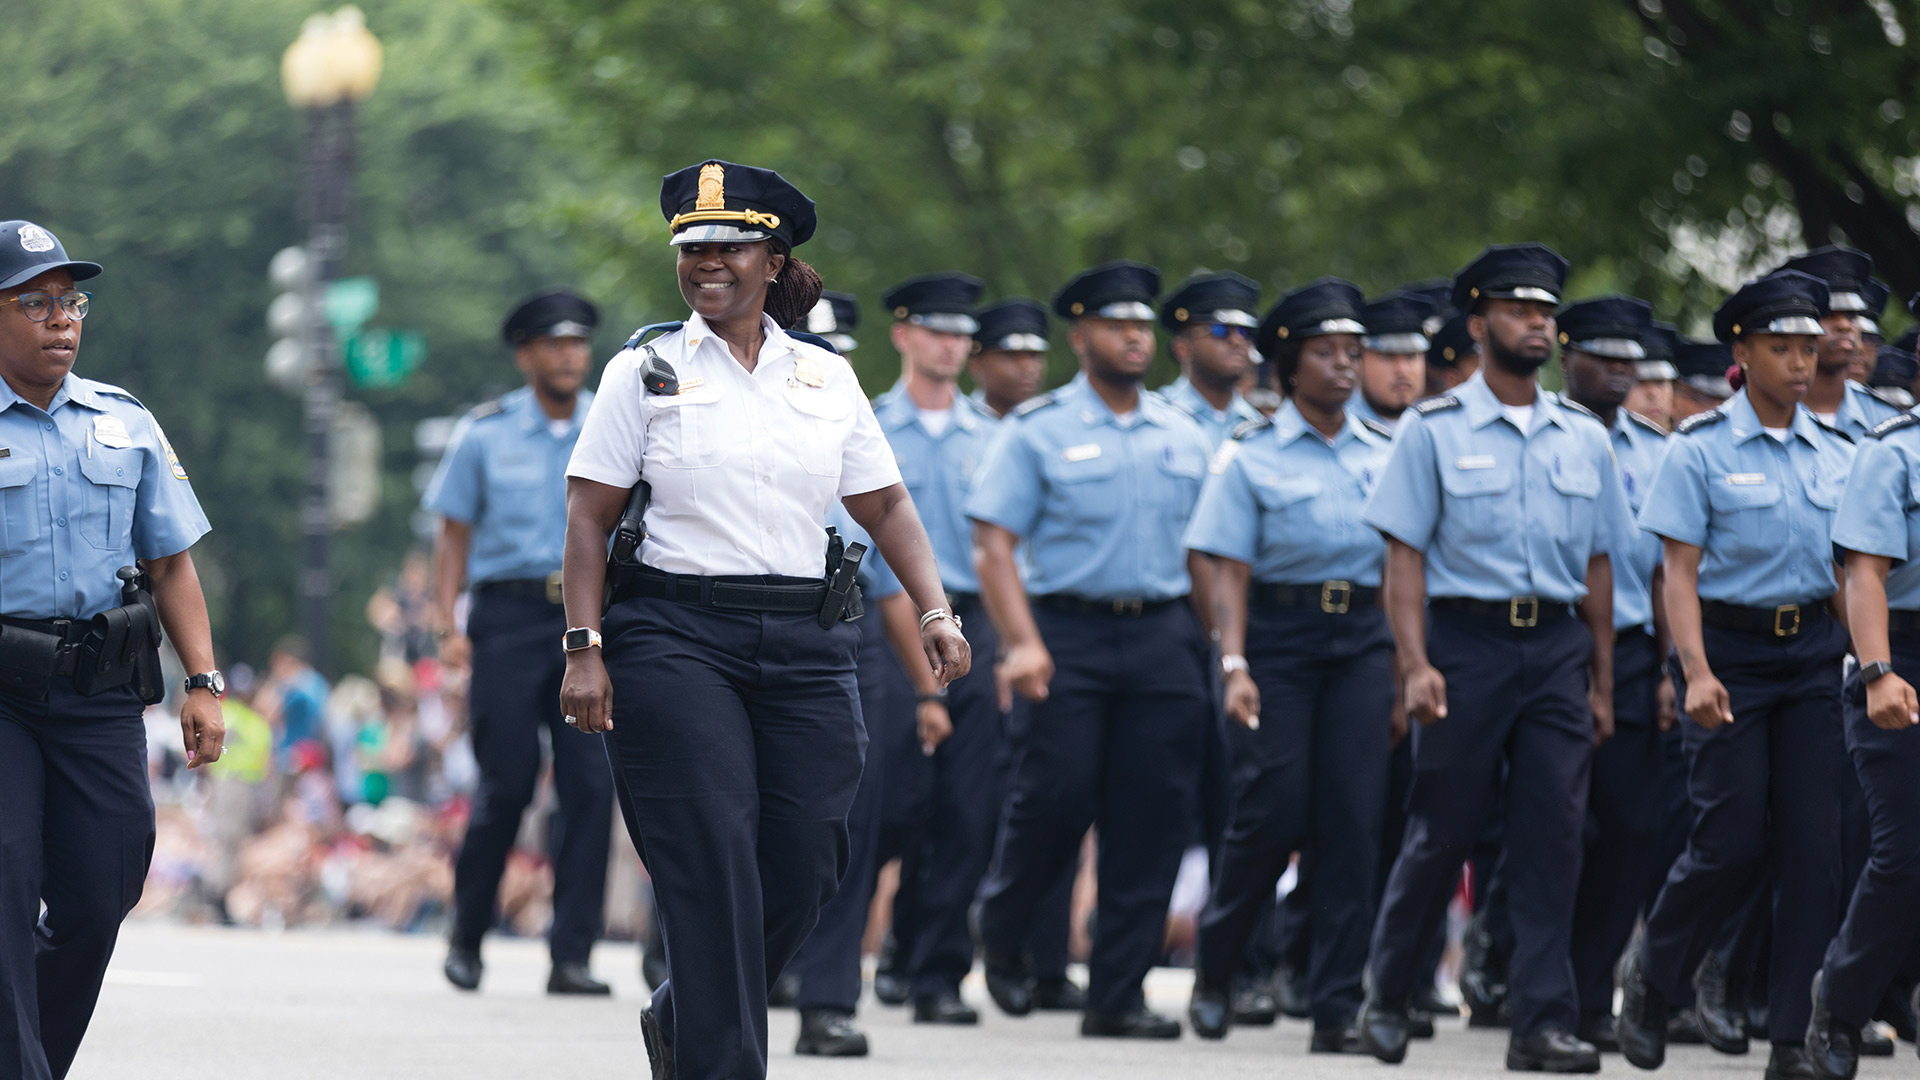 american women police officers